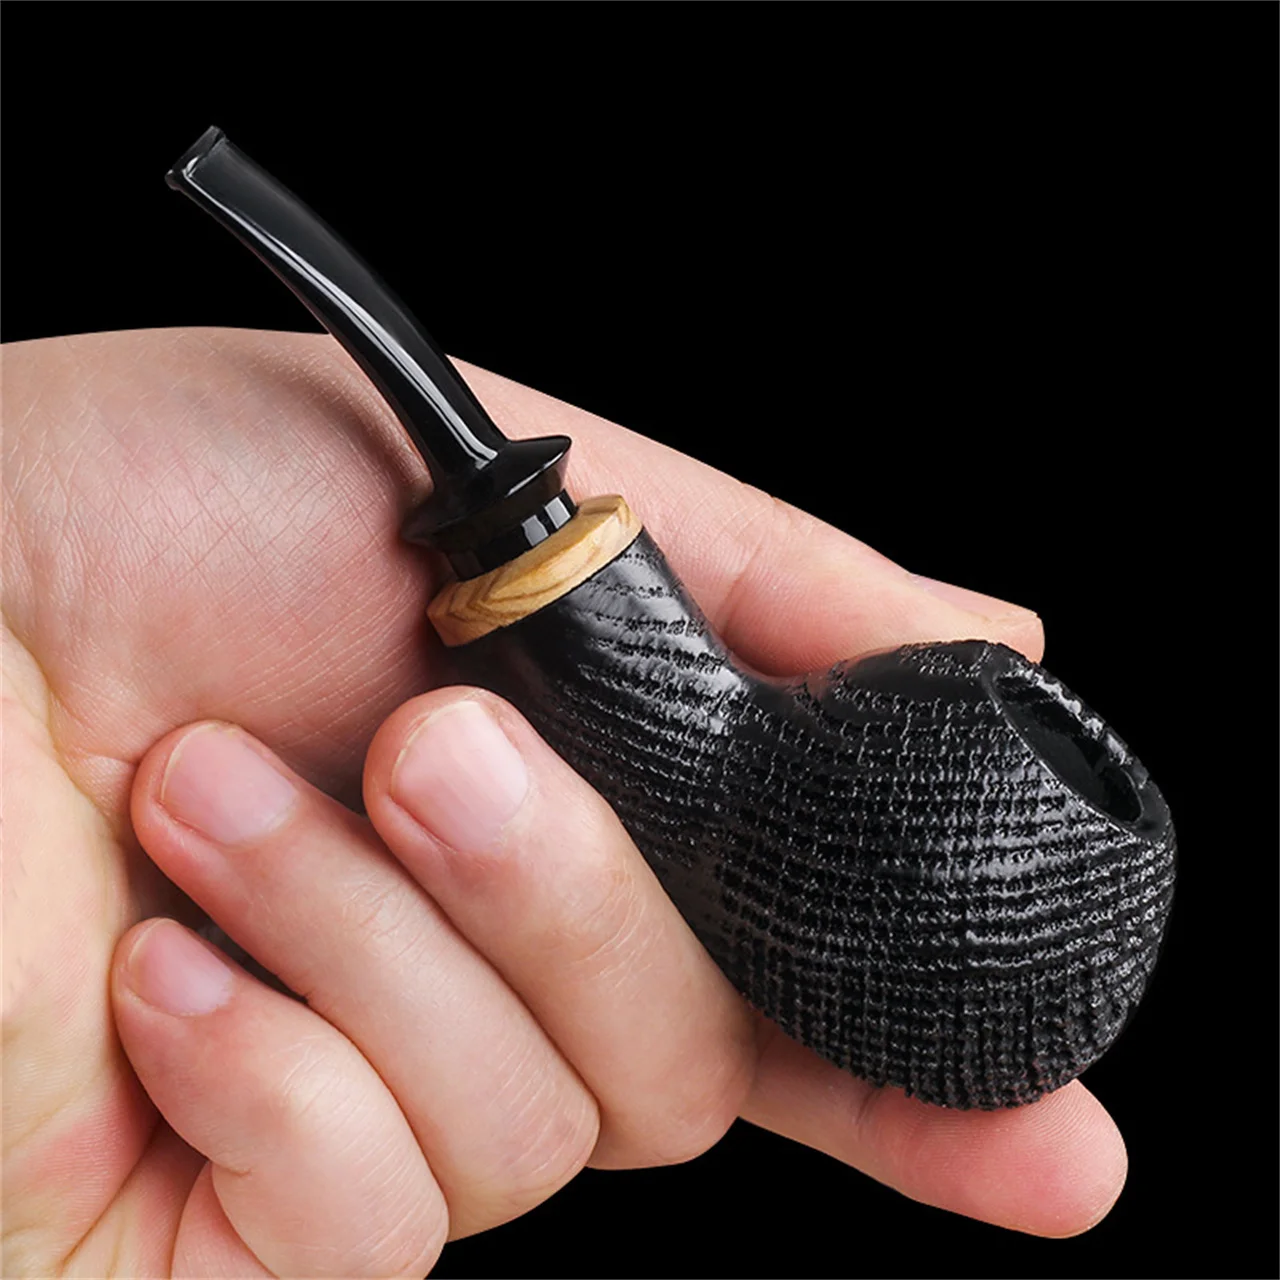 

Army Mount Black Oak Wood 3mm Filter Cut Tobacco Pipe Retro Gentleman Bent Type Handle Handmade Smoking Pipe With Gift Accessory